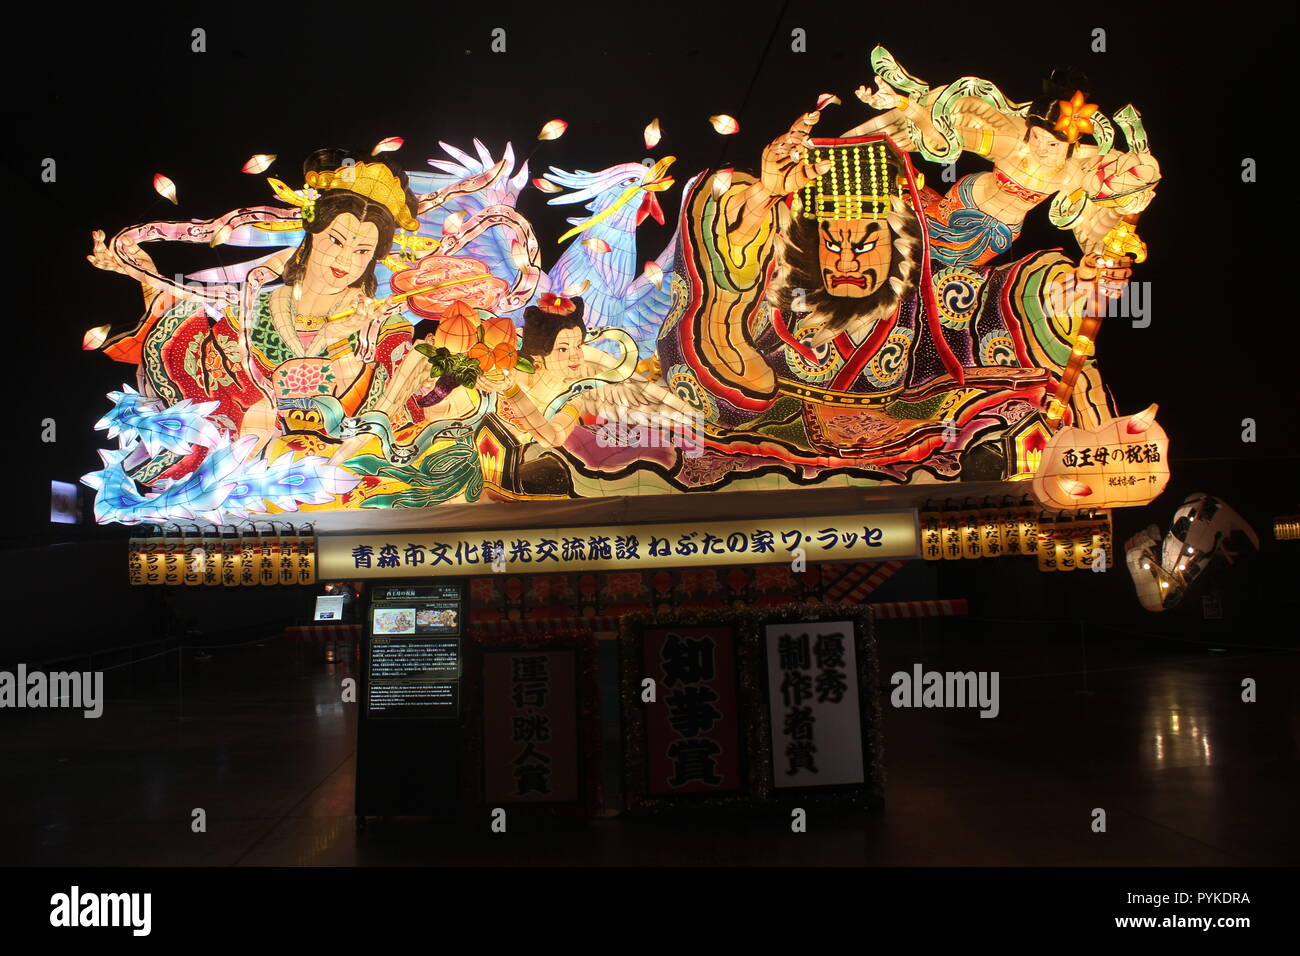 Aomori, Aomori, China. 29th Oct, 2018. Aomori, Japan-As Halloween approaches, the Japanese-style Ã¢â‚¬ËœHalloweenÃ¢â‚¬â„¢ show can also be seen at the Nebuta Warasse Museum in Aomori, northeastern Japan. Many 'scary' lanterns of Nebuta (Ghost of Sleeping) can be seen at the museum. ''Nebuta'' refers to the float of a brave warrior-figure which is carried through the center of the city, while dancers wearing a unique type of costume called haneto dance around in time with the chant RasserÃ„Â (shorten dialectal version of ''irasshai'', calling visitors and customers to watch or join). The A Stock Photo